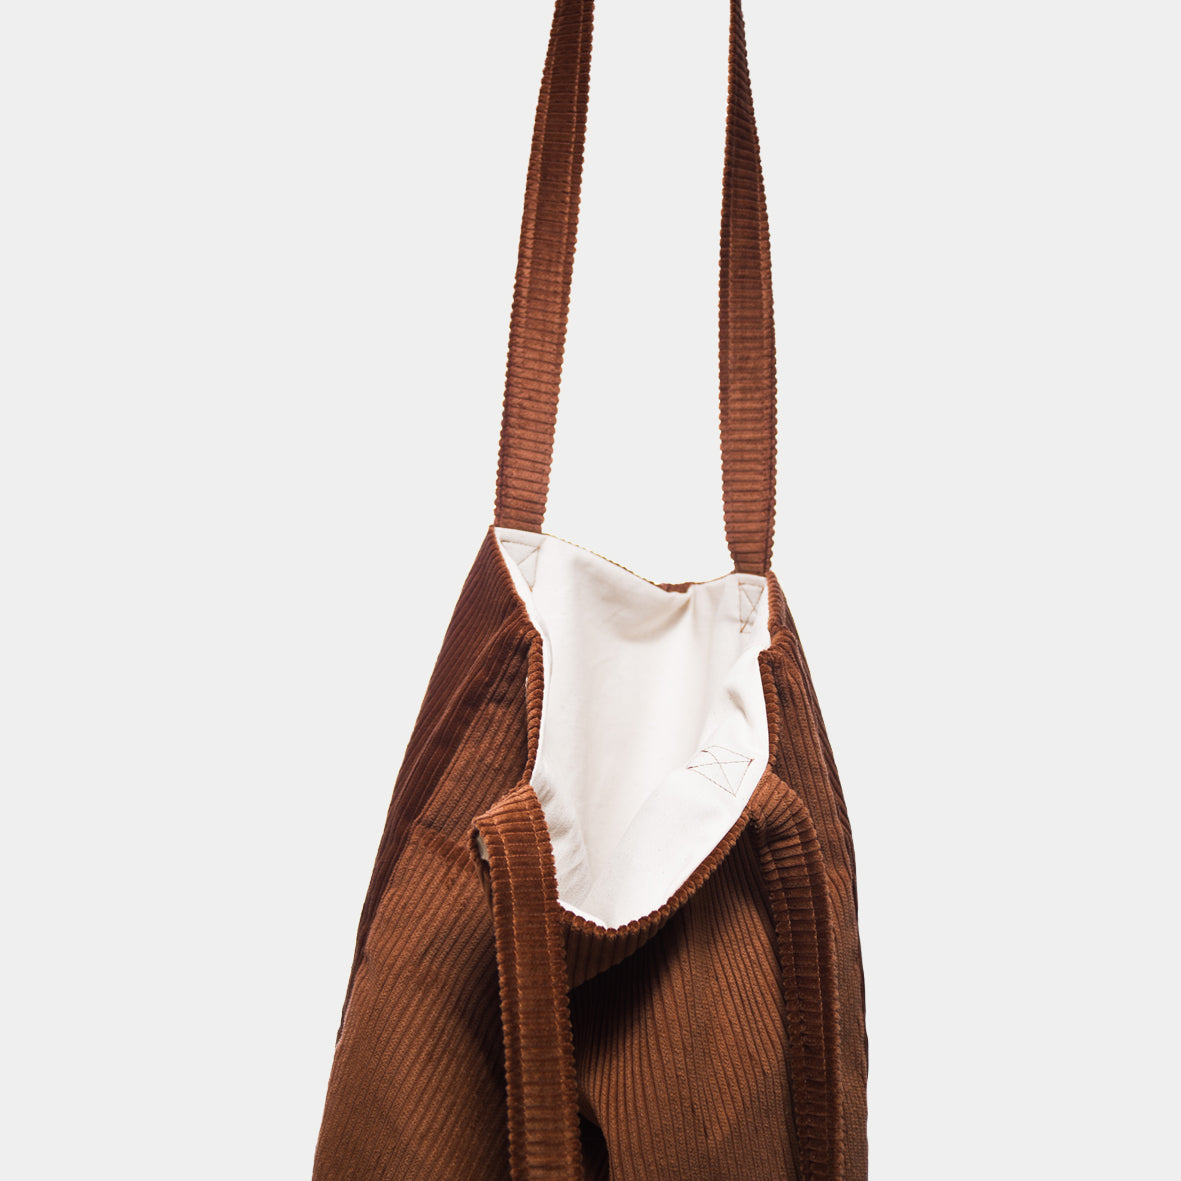 Corduroy tote bag, toffee brown colour with natural colour drill fabric lining. Hand made in New Zealand.